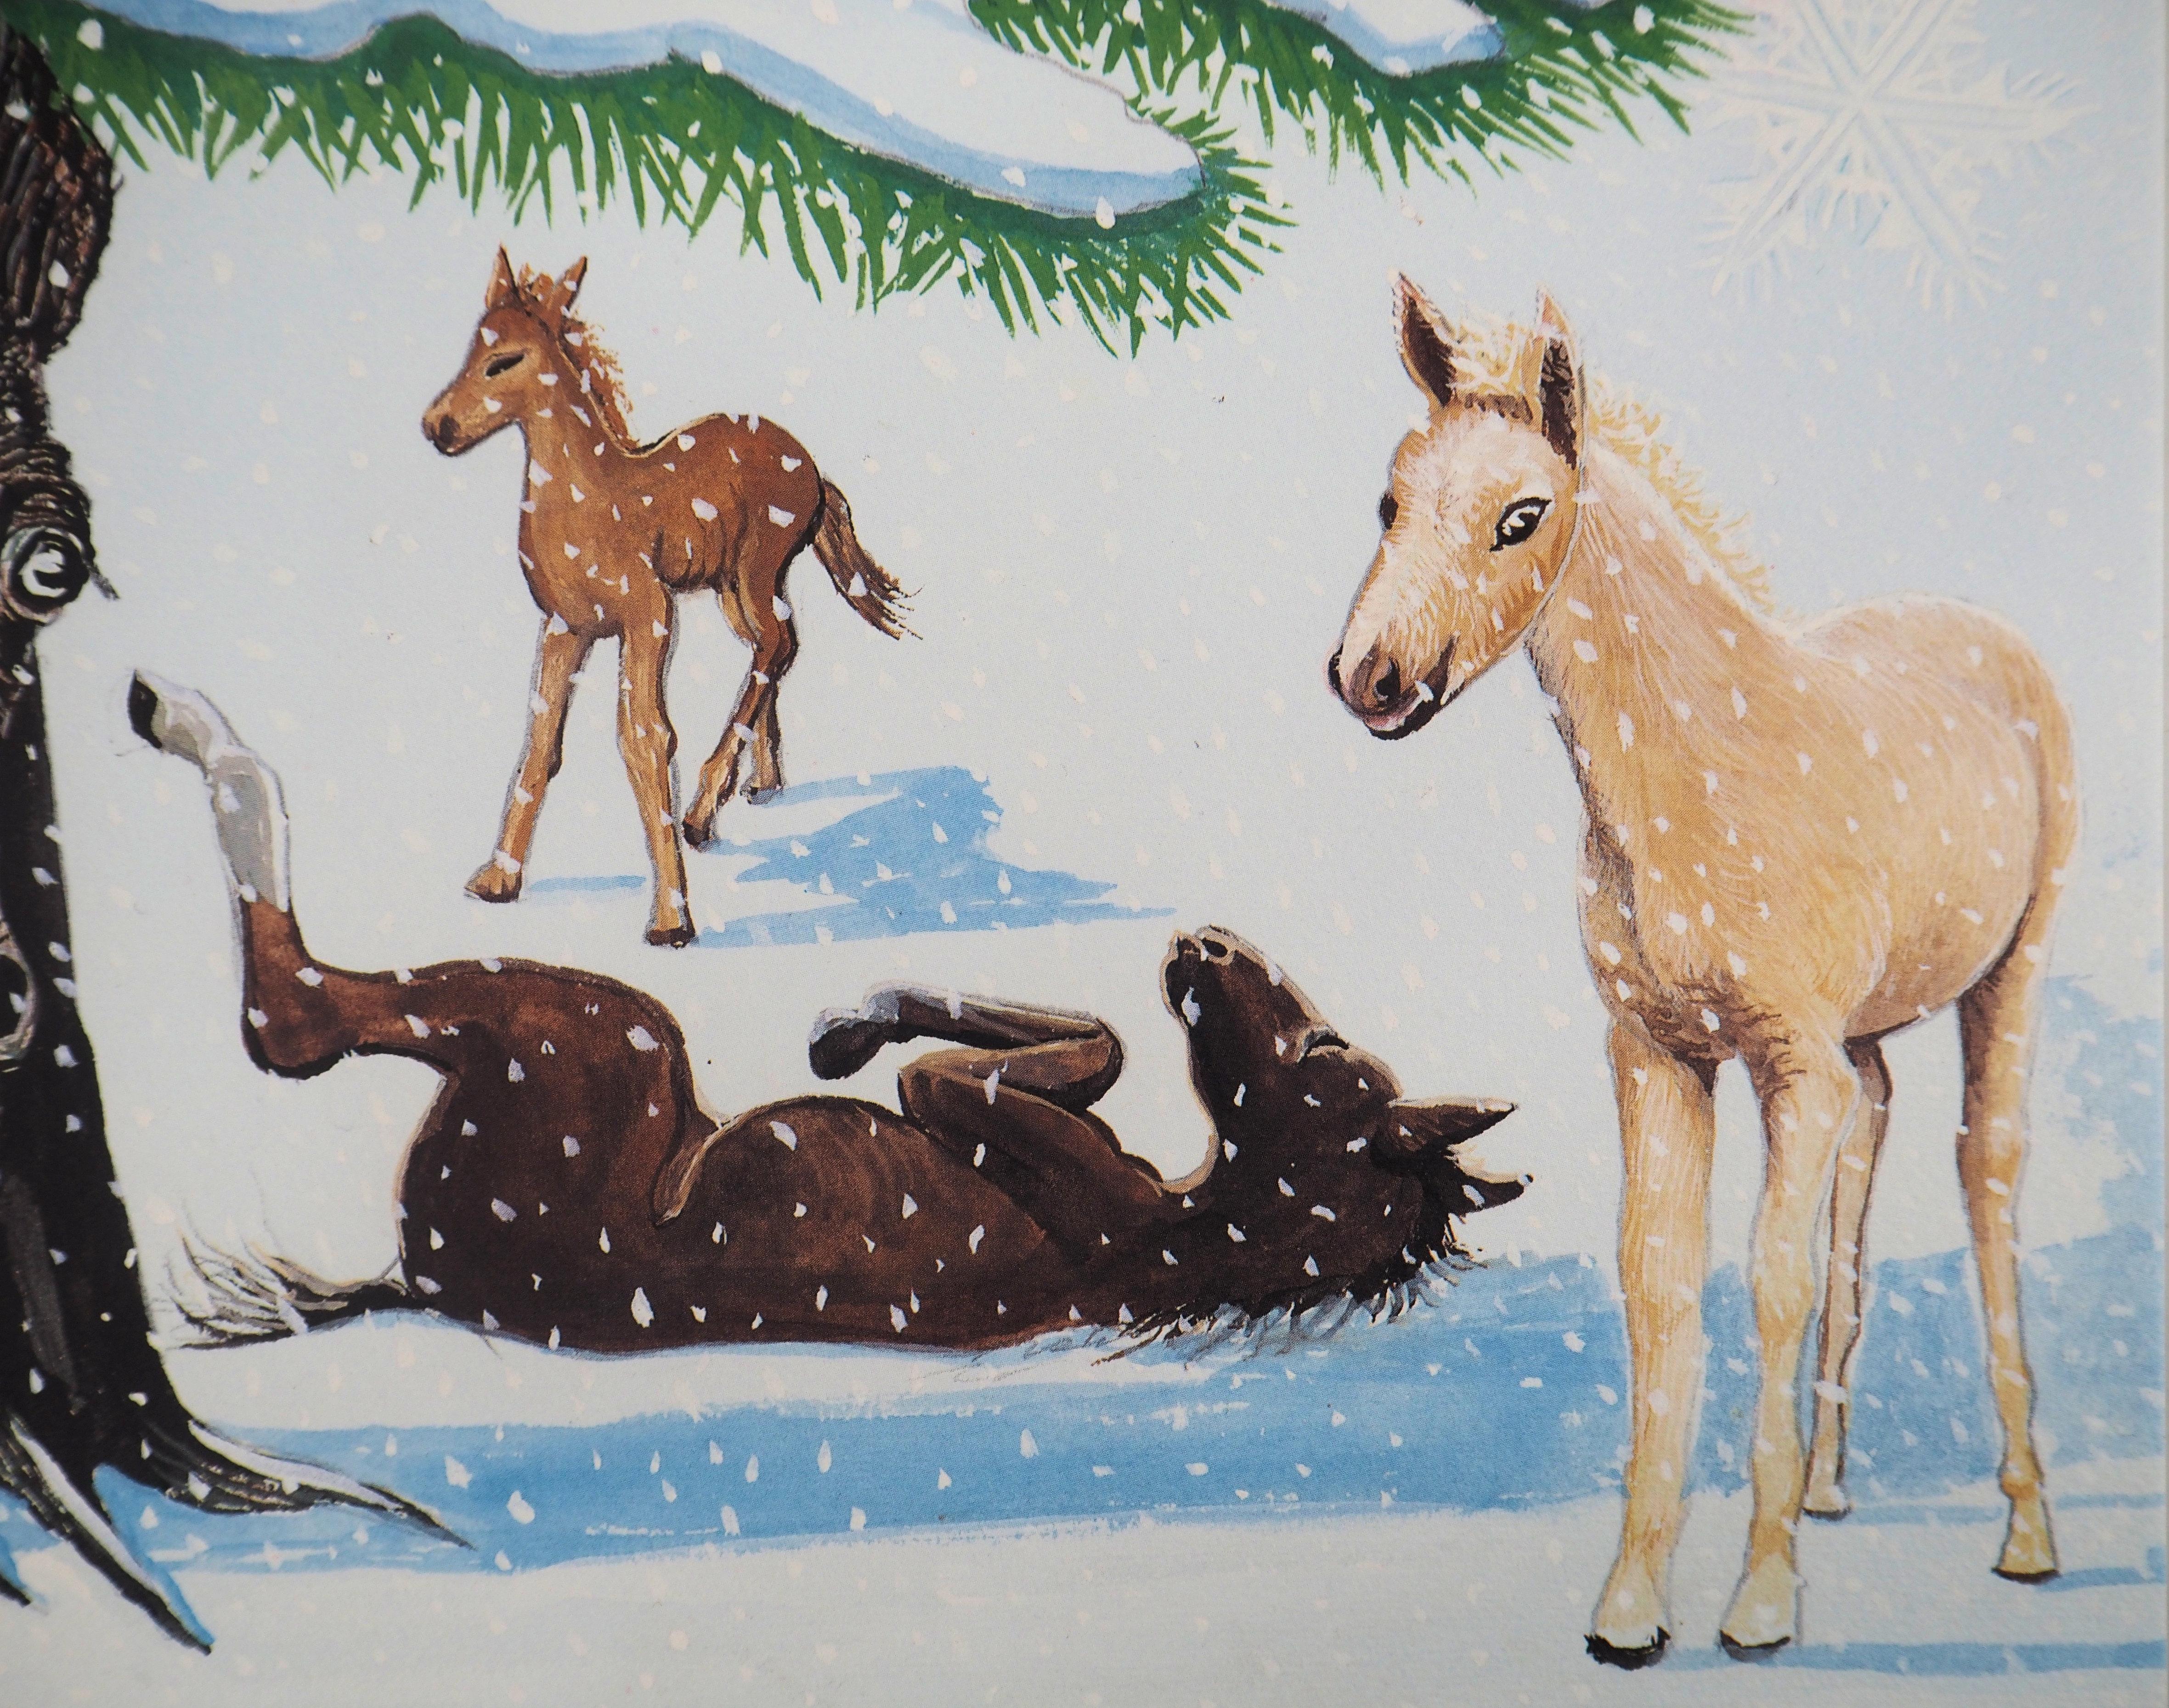 Christmas Tree and Horses - Lithograph, Ltd 100 copies For Sale 1